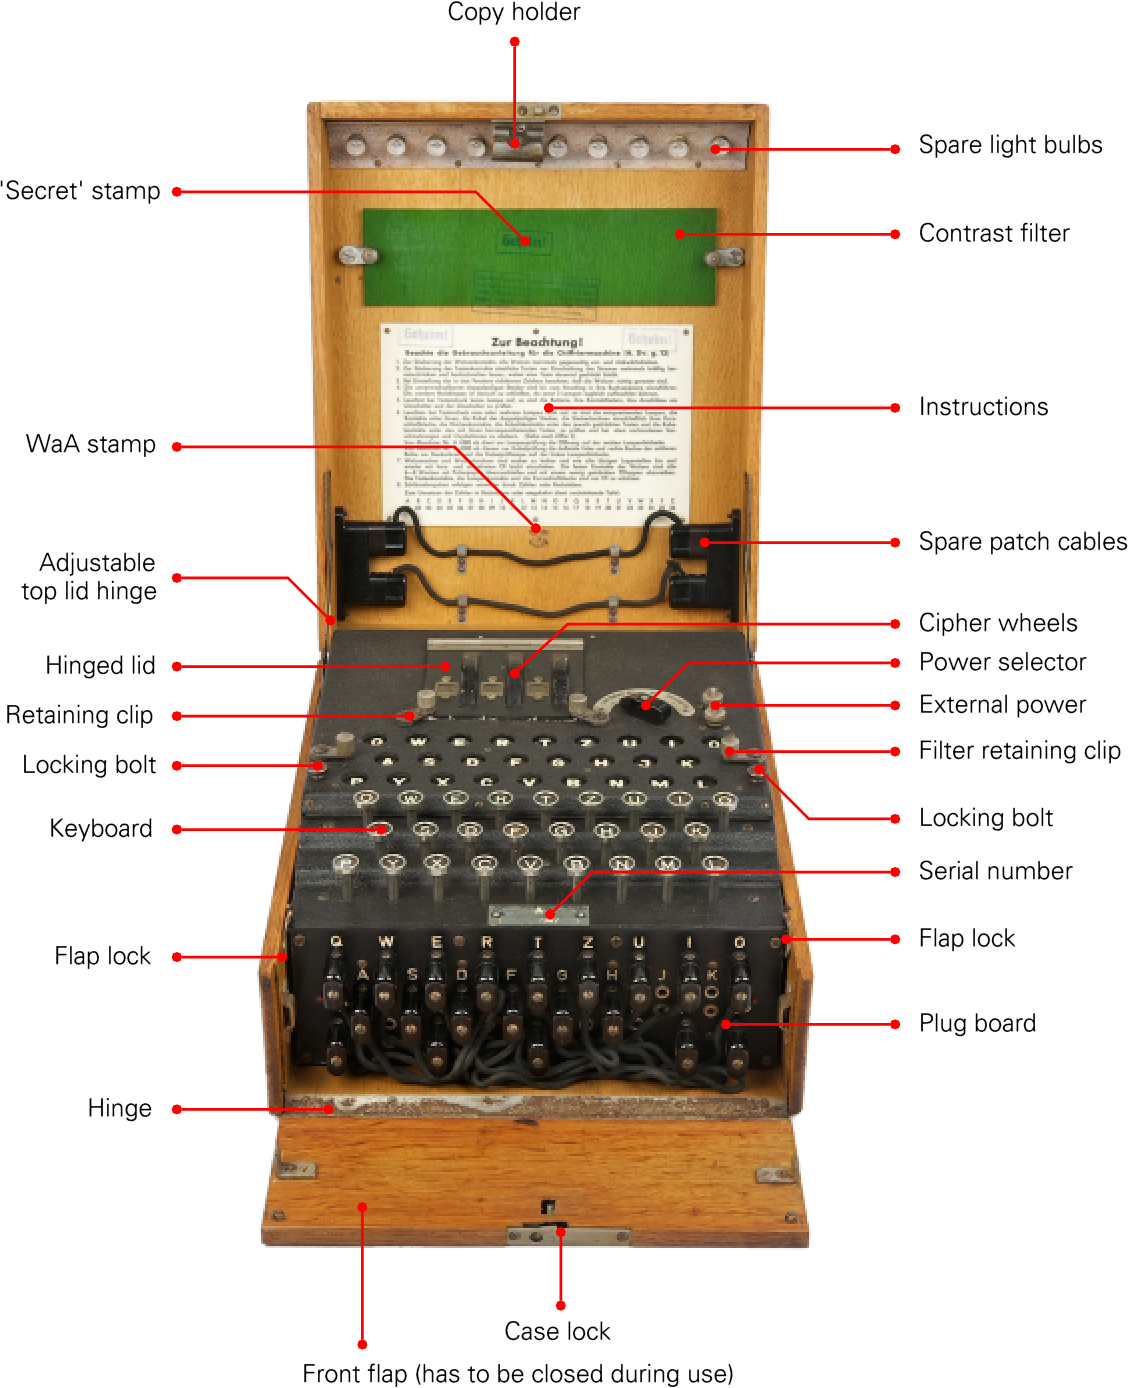 Enigma I controls and connections